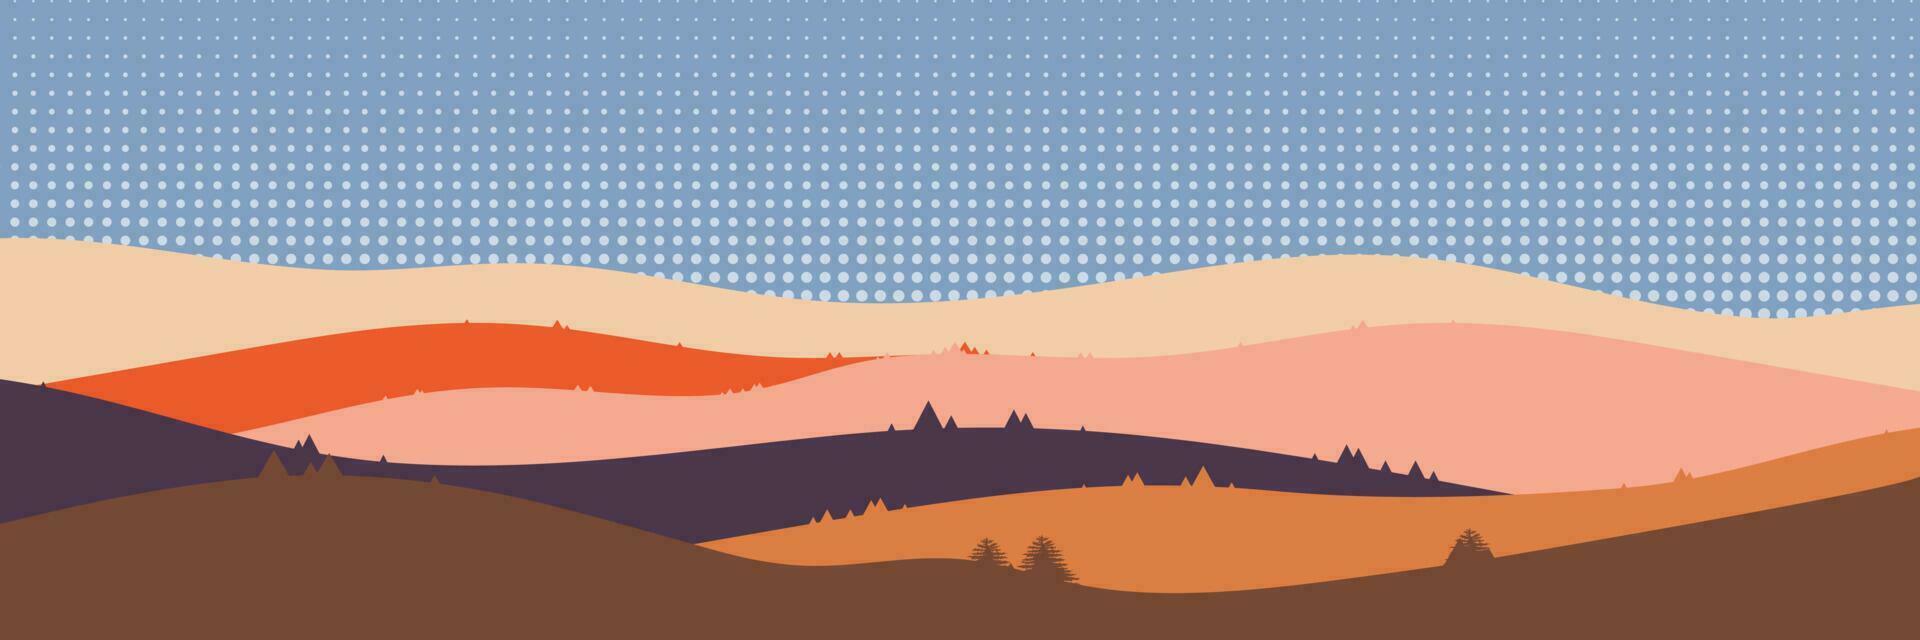 Beautiful landscape. Asian style. Long hills and mountains scenery background design. Vector illustration. Suitable for landing pages, web, wall painting and posters.